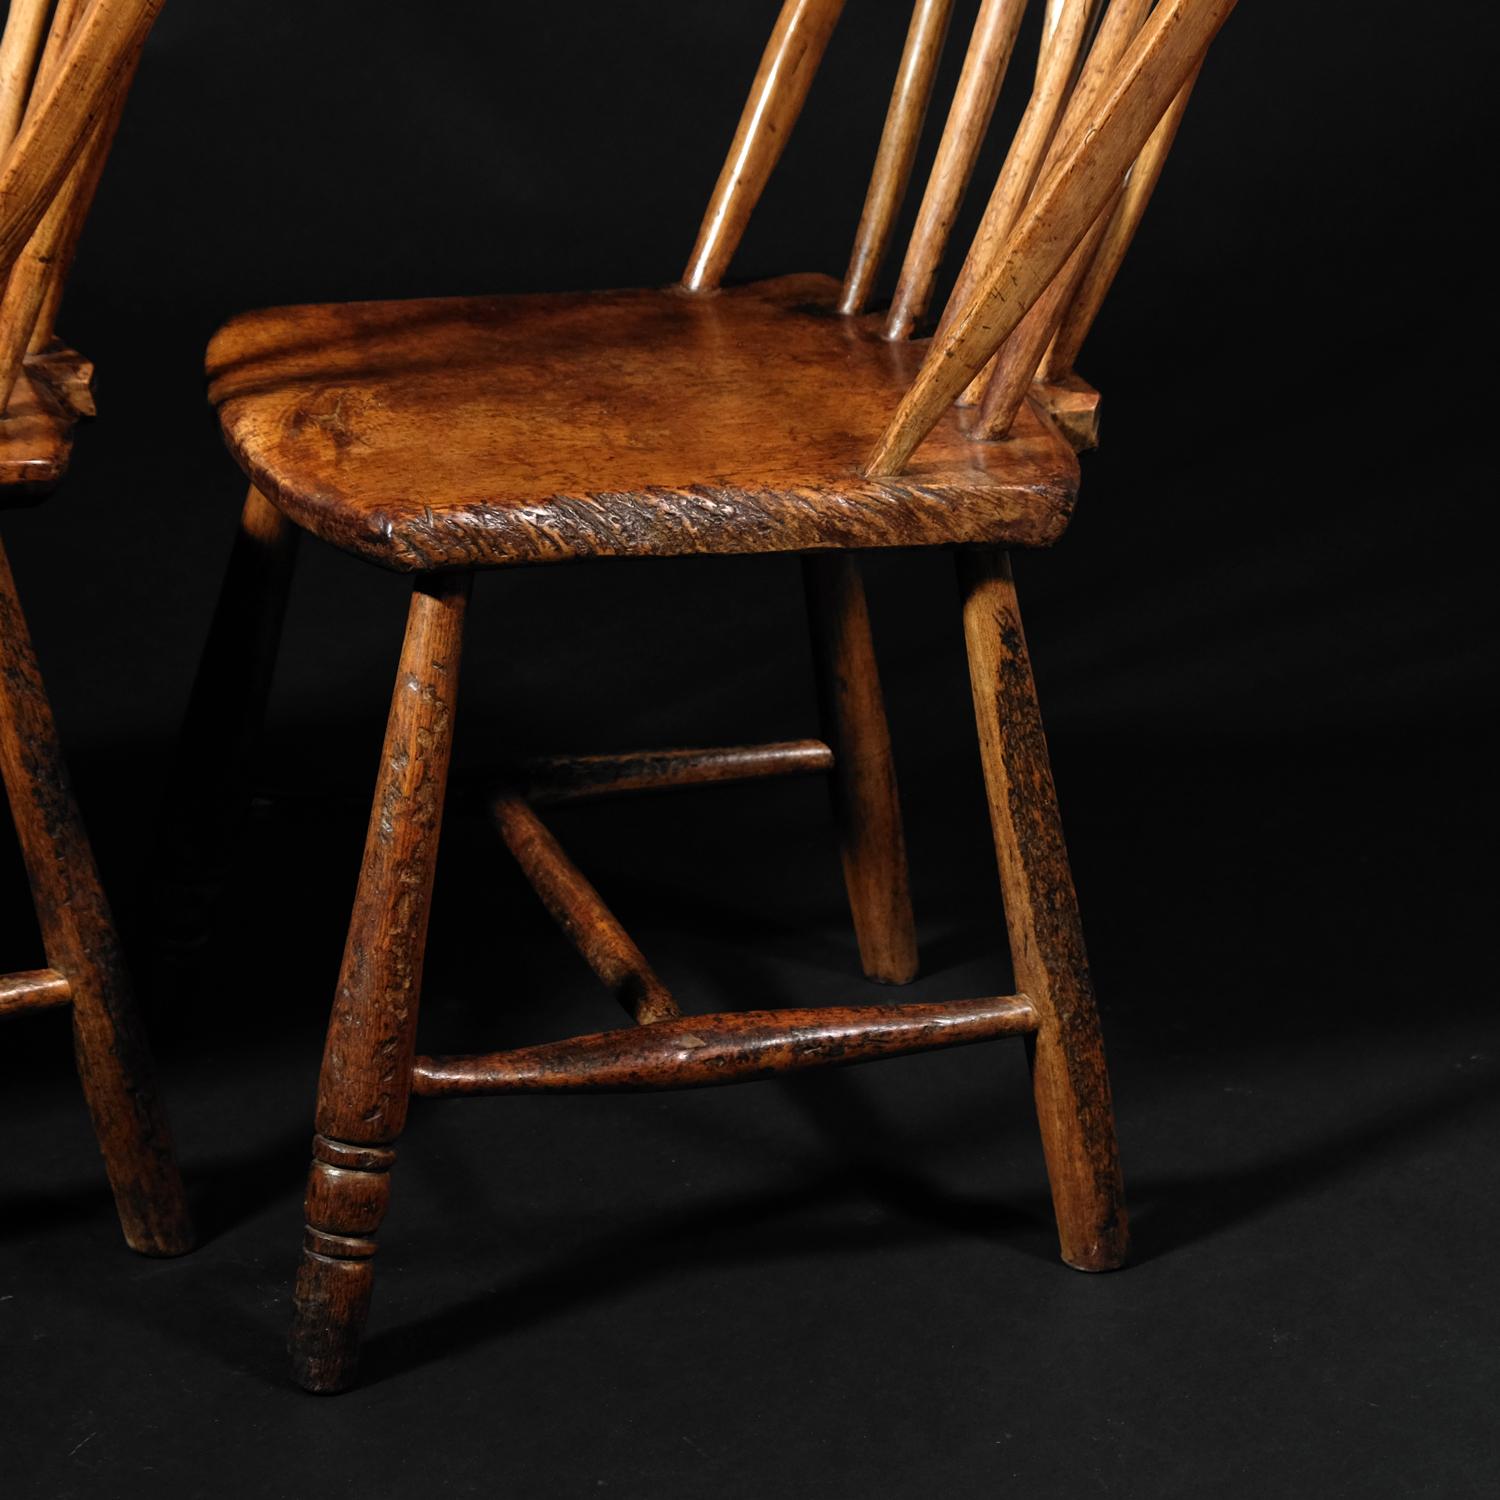 Ash Pair of 18th Century English Country Side Chairs, Yealmpton Devonshire, Sycamore